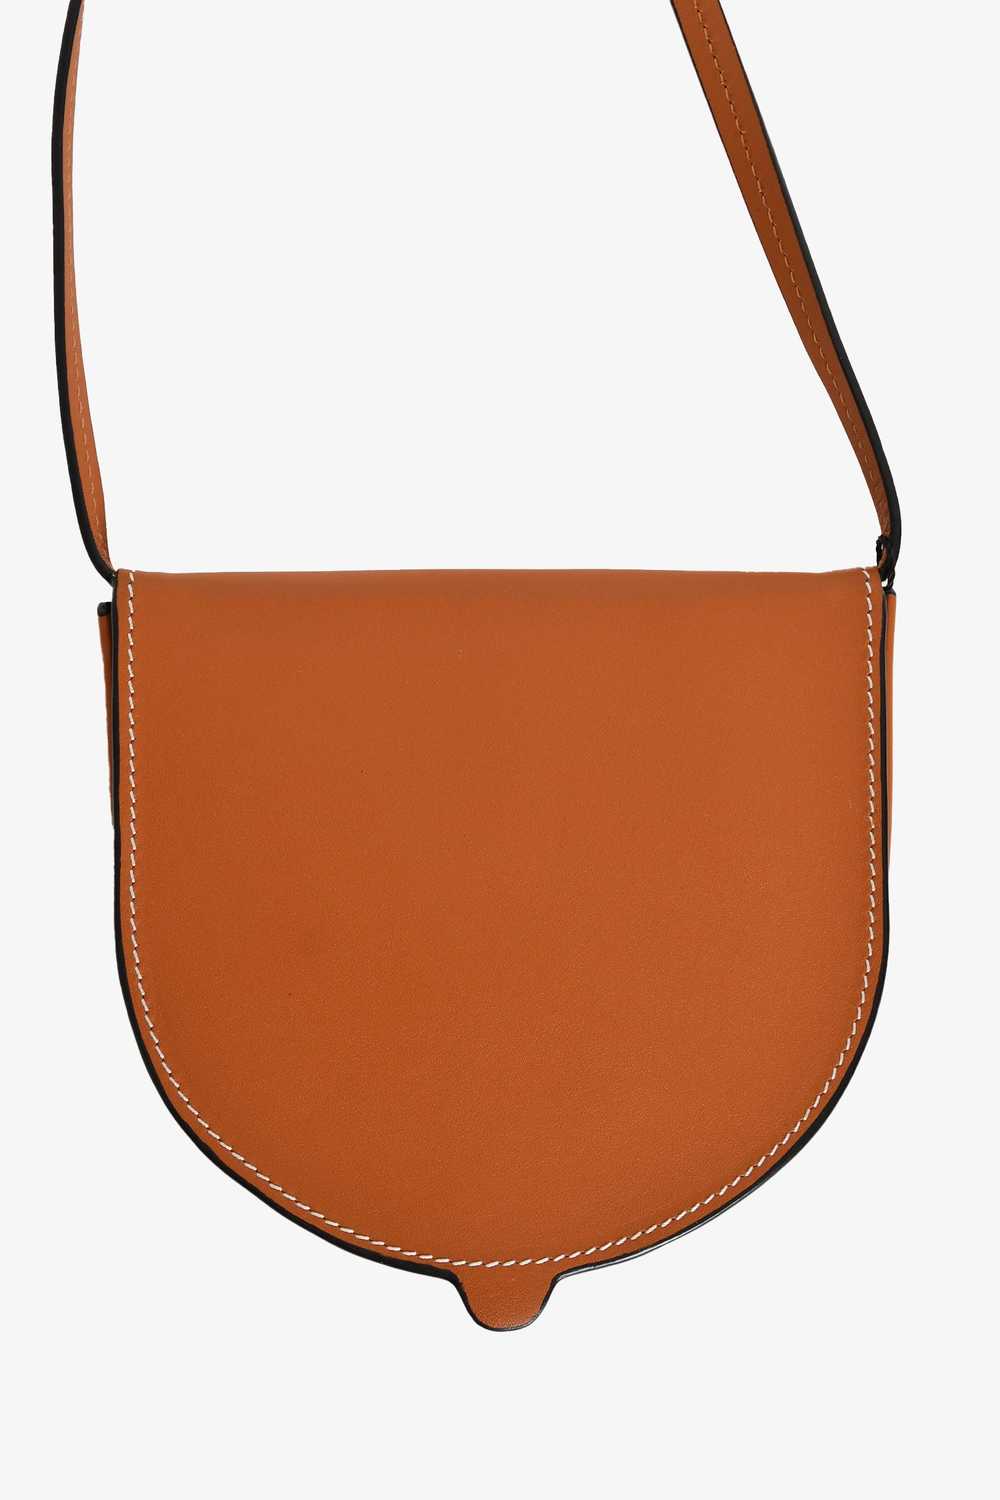 Loewe Brown Leather Small 'Heel' Crossbody Pouch - image 2